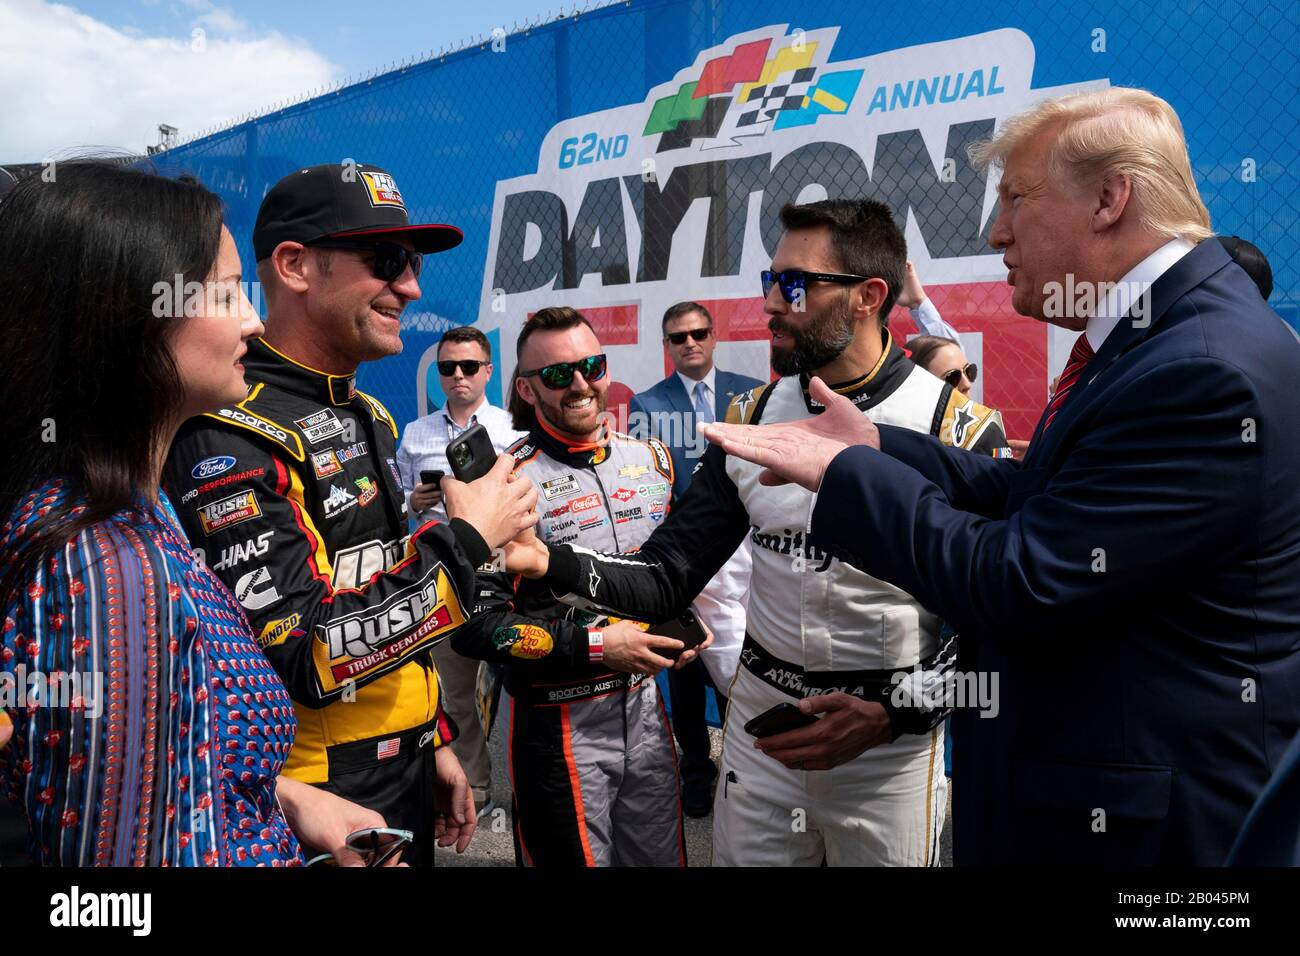 U.S President Donald Trump and First Lady Melania Trump greet NASCAR drivers at Daytona International Speedway February 16, 2020 in Daytona Beach, Florida. Trump served as the official starter of the the NASCAR Daytona 500 auto race and took a ride in the presidential limousine around the track. Stock Photo